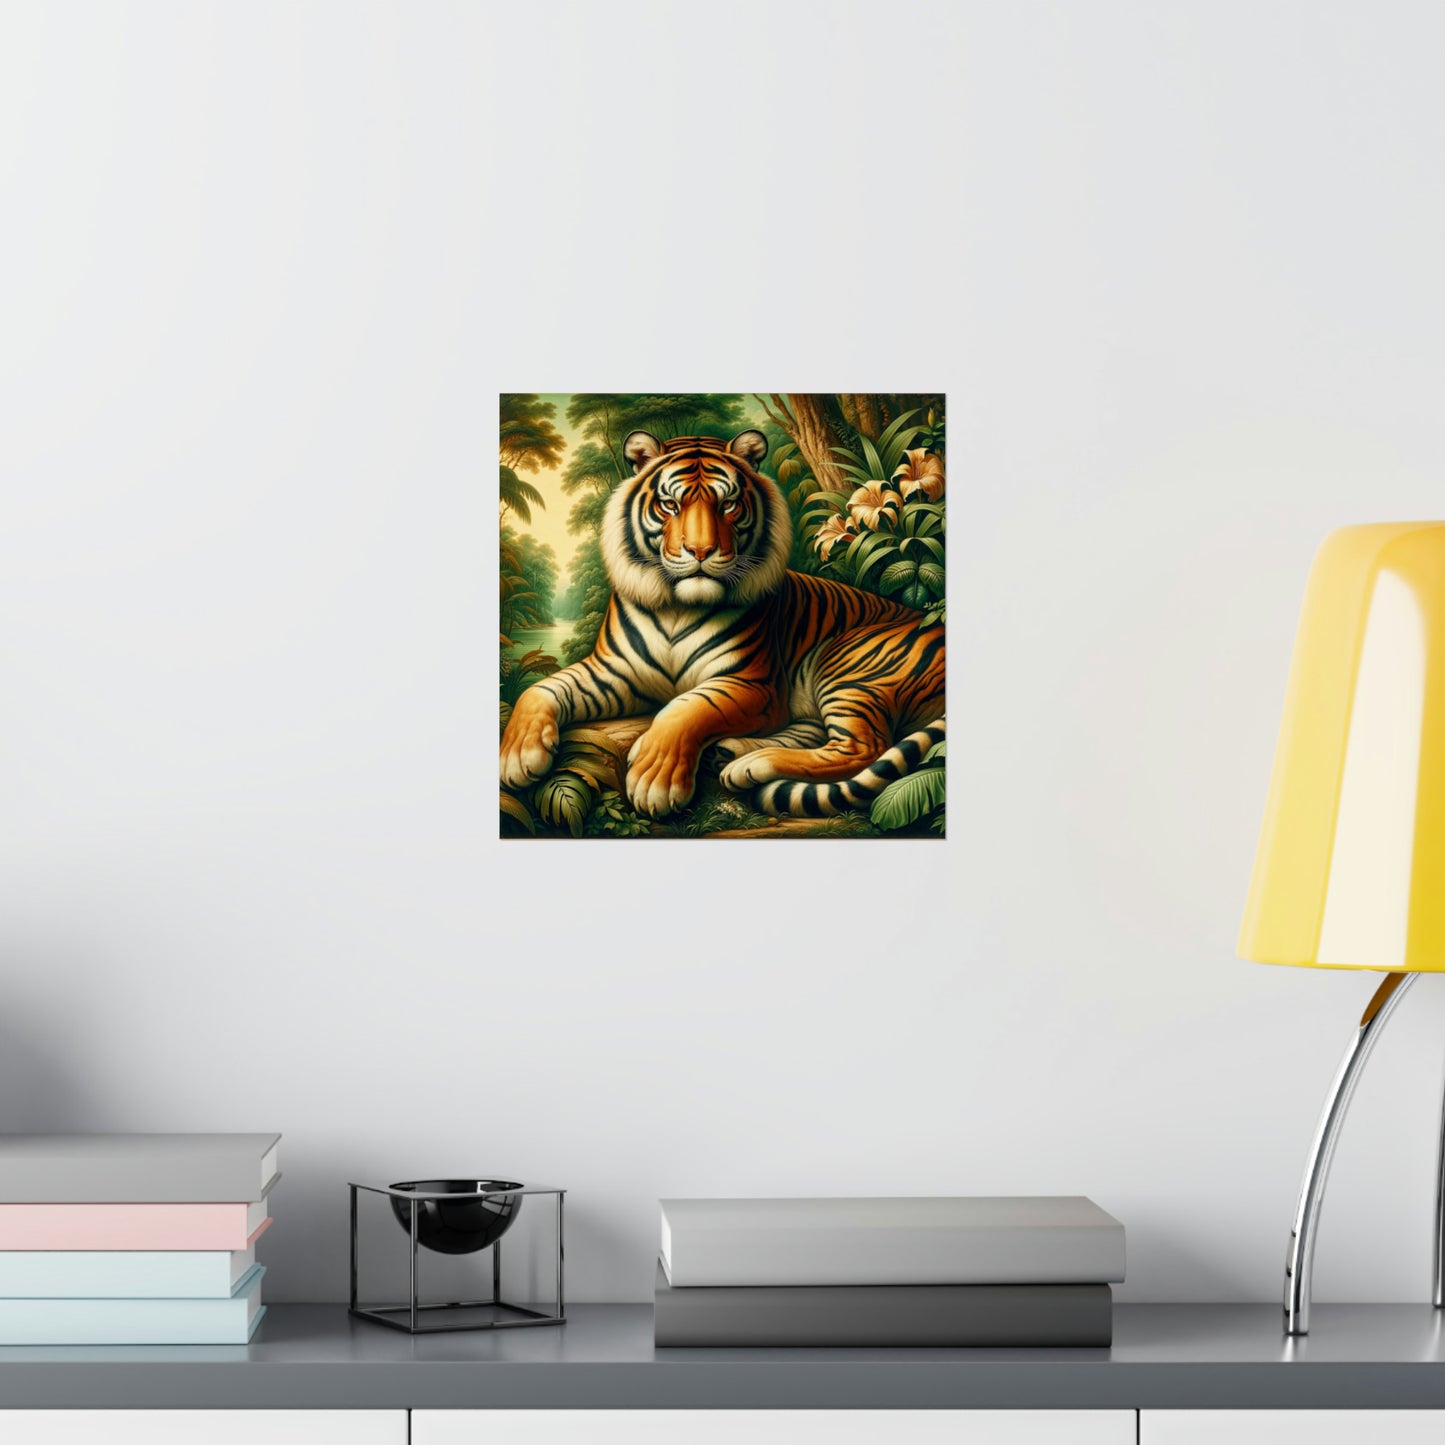 Tiger Painting Poster Print, Retro Vintage Jungle Wall Art Square Paper Artwork Small Large Cool Room Office Decor Hanging